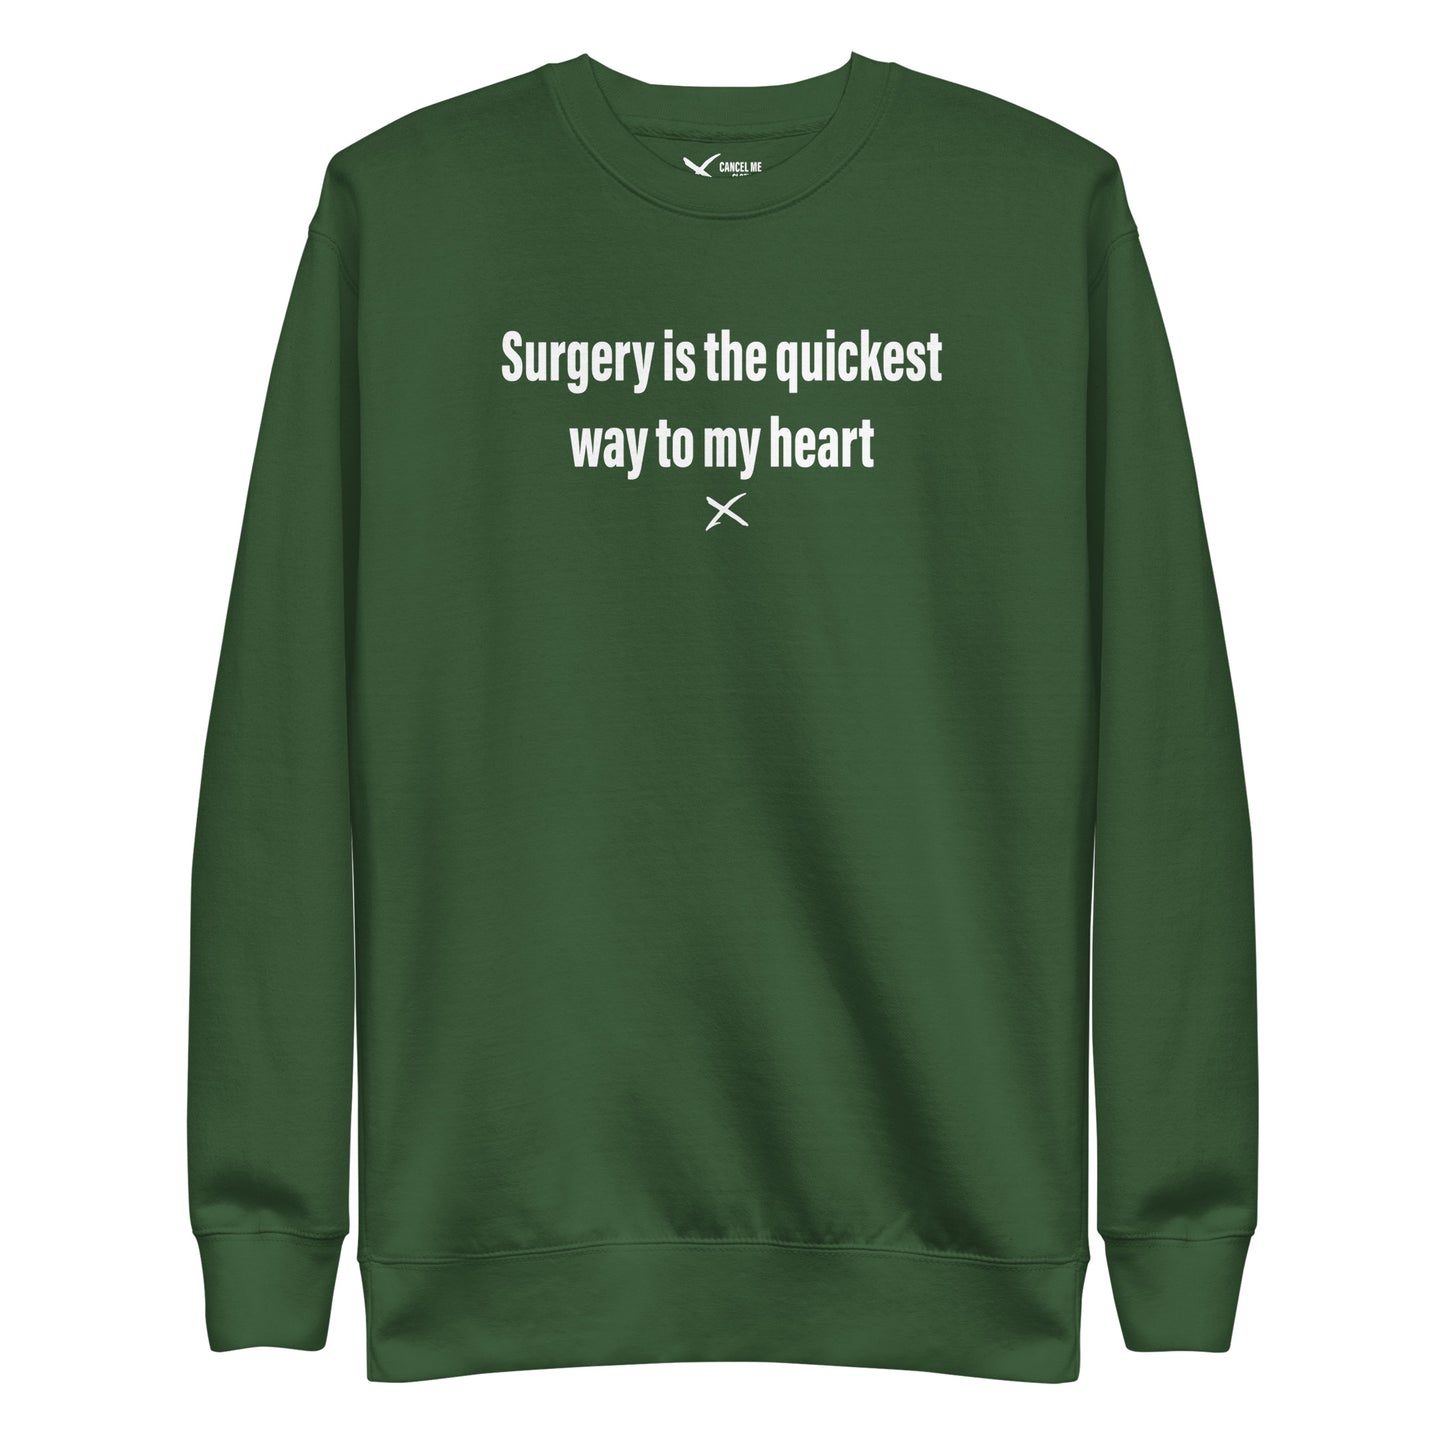 Surgery is the quickest way to my heart - Sweatshirt